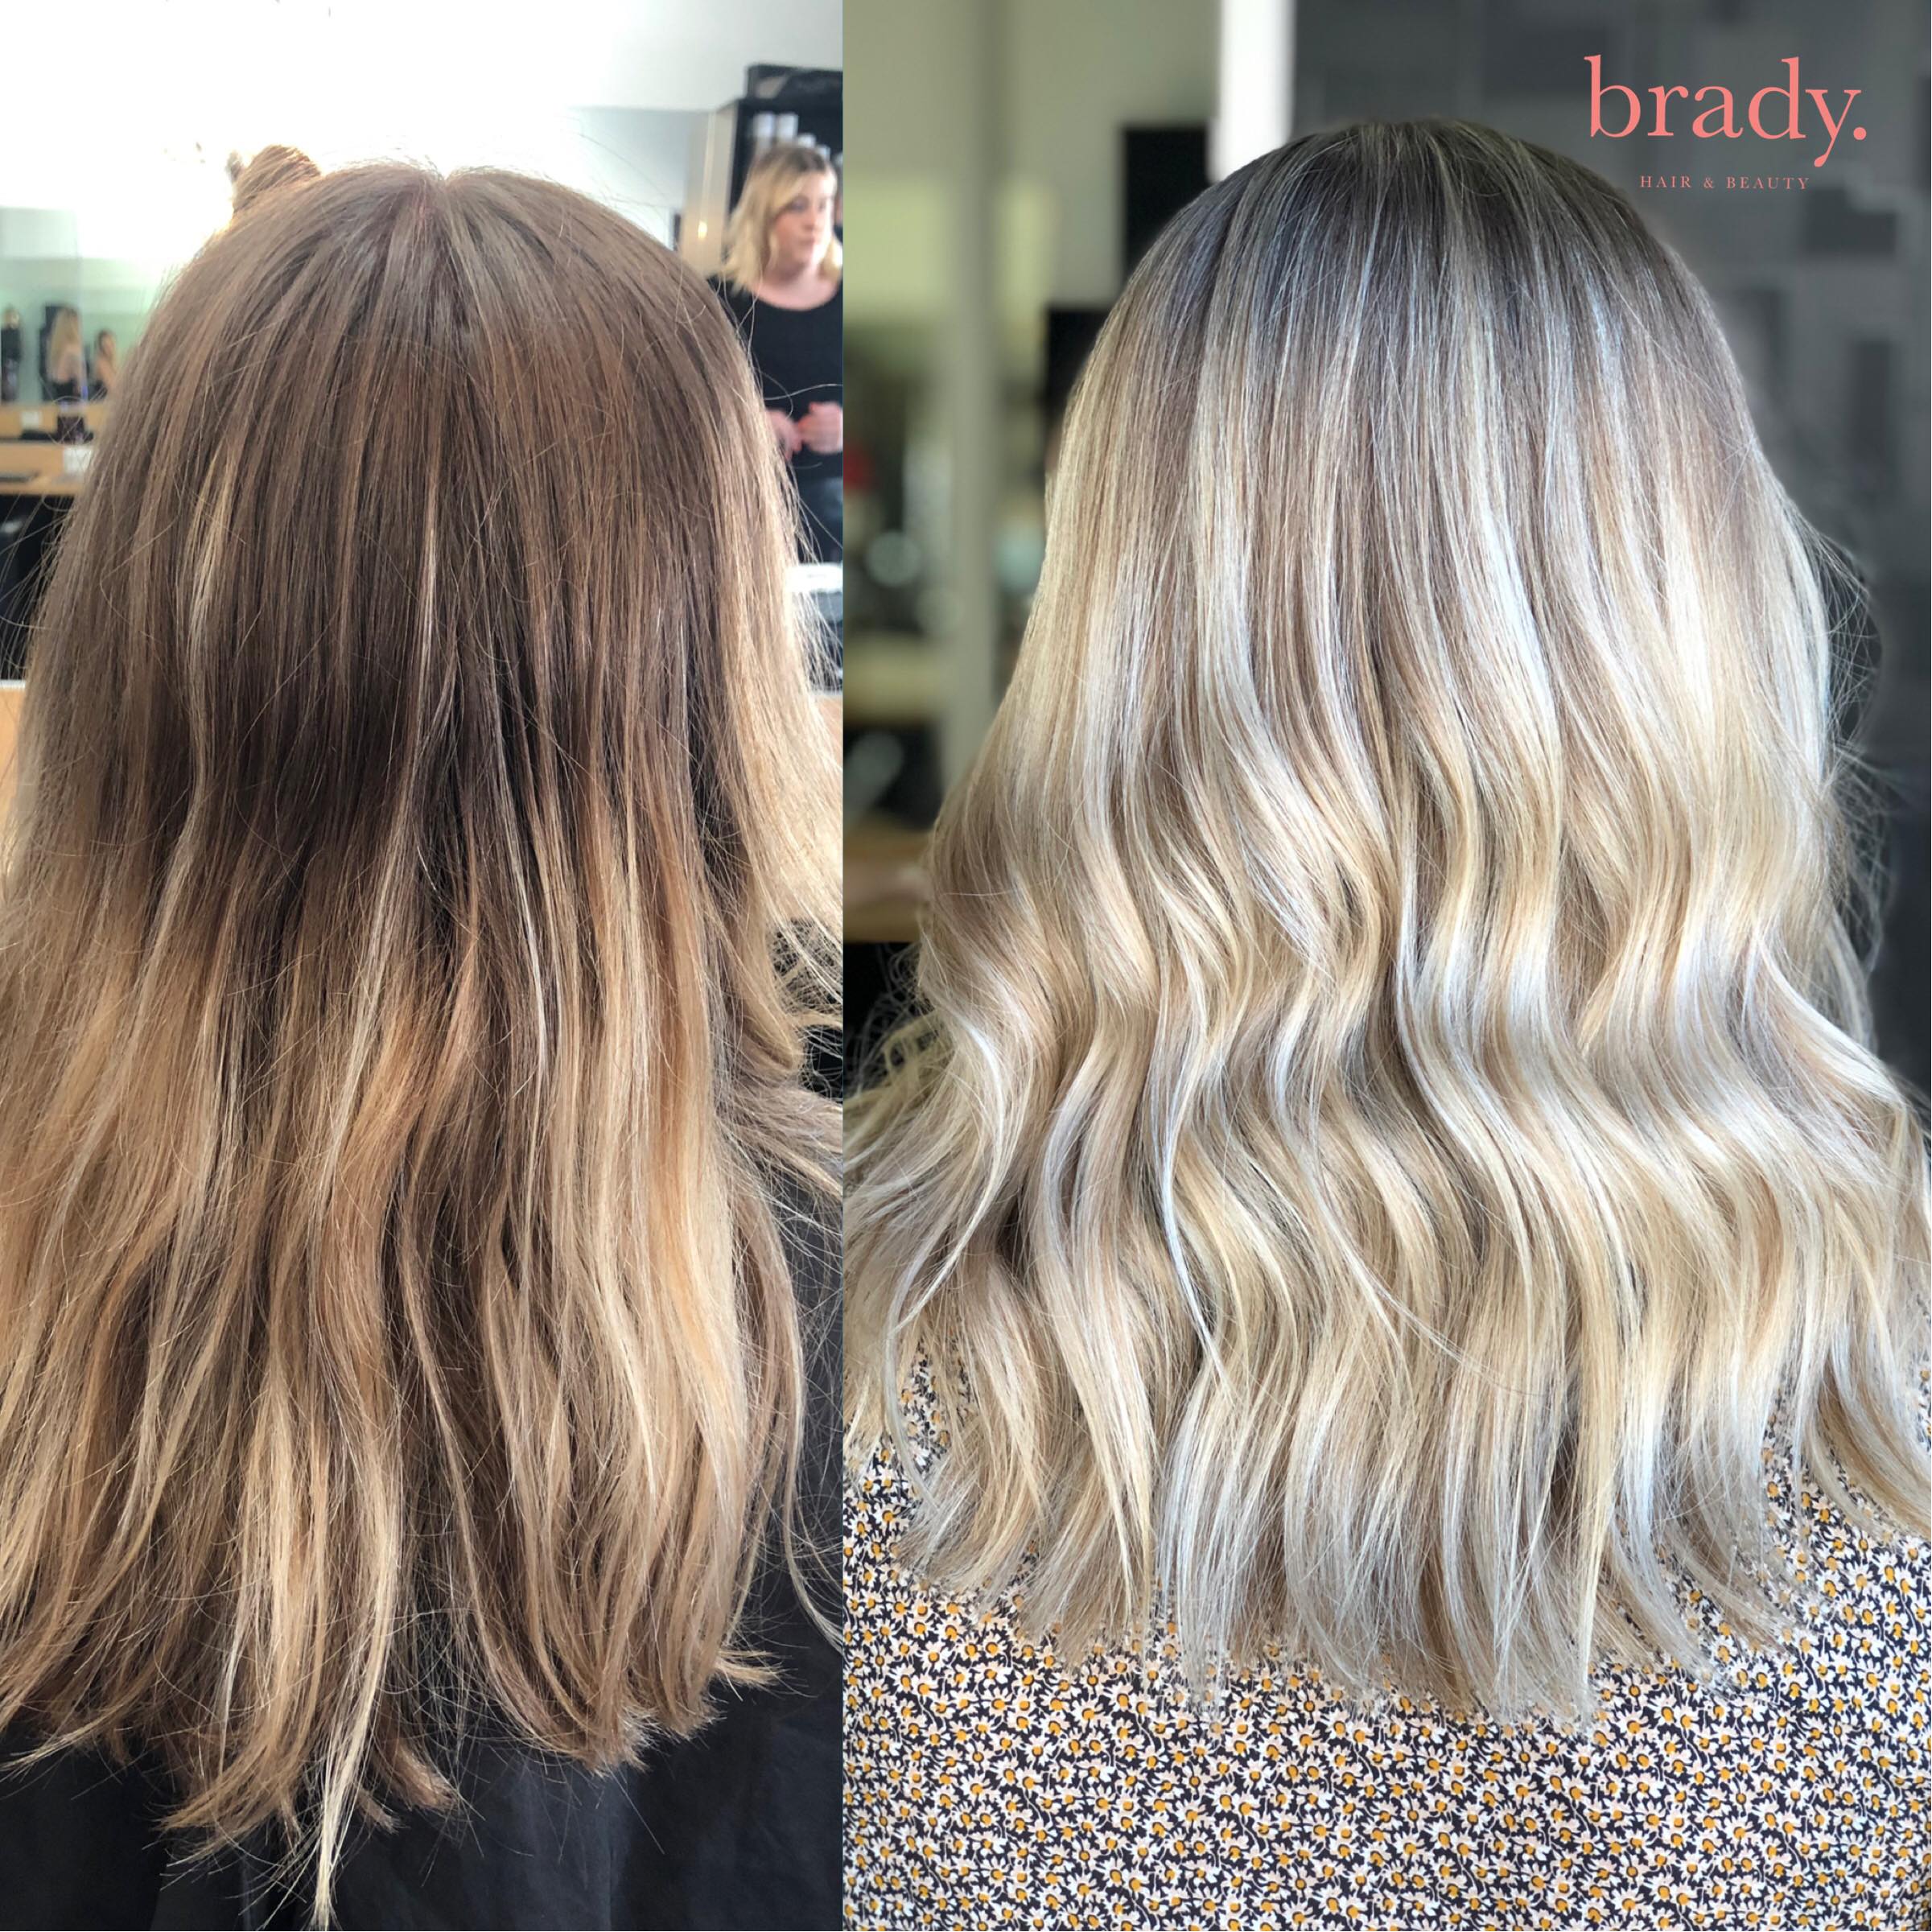  Before and after photo, medium wavy blonde hair styled by Brady. Hair &amp; Beauty, Toowong. 